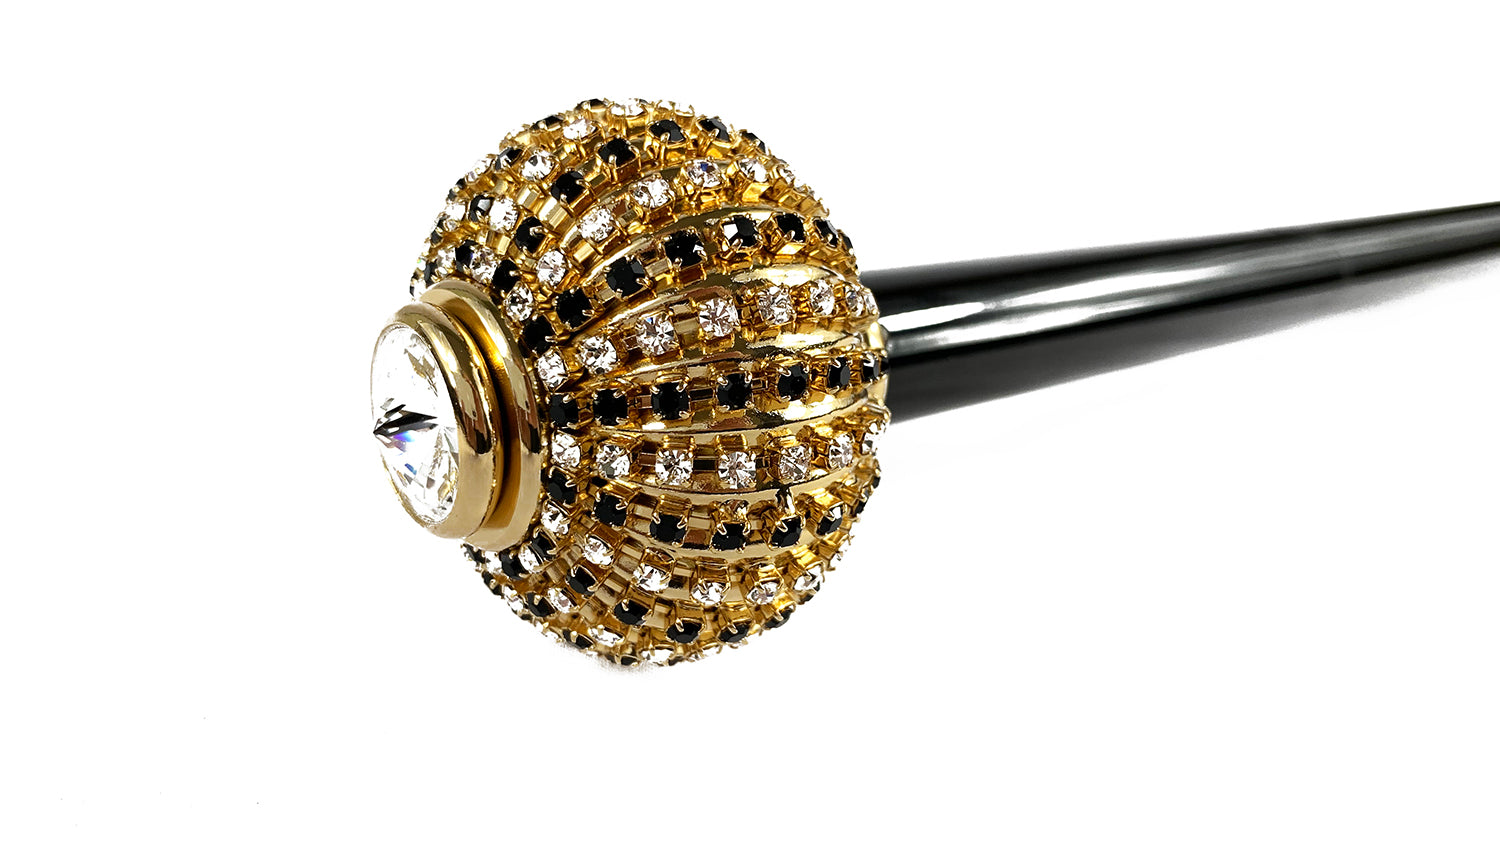 Walking stick with brass onion with black and white crystals